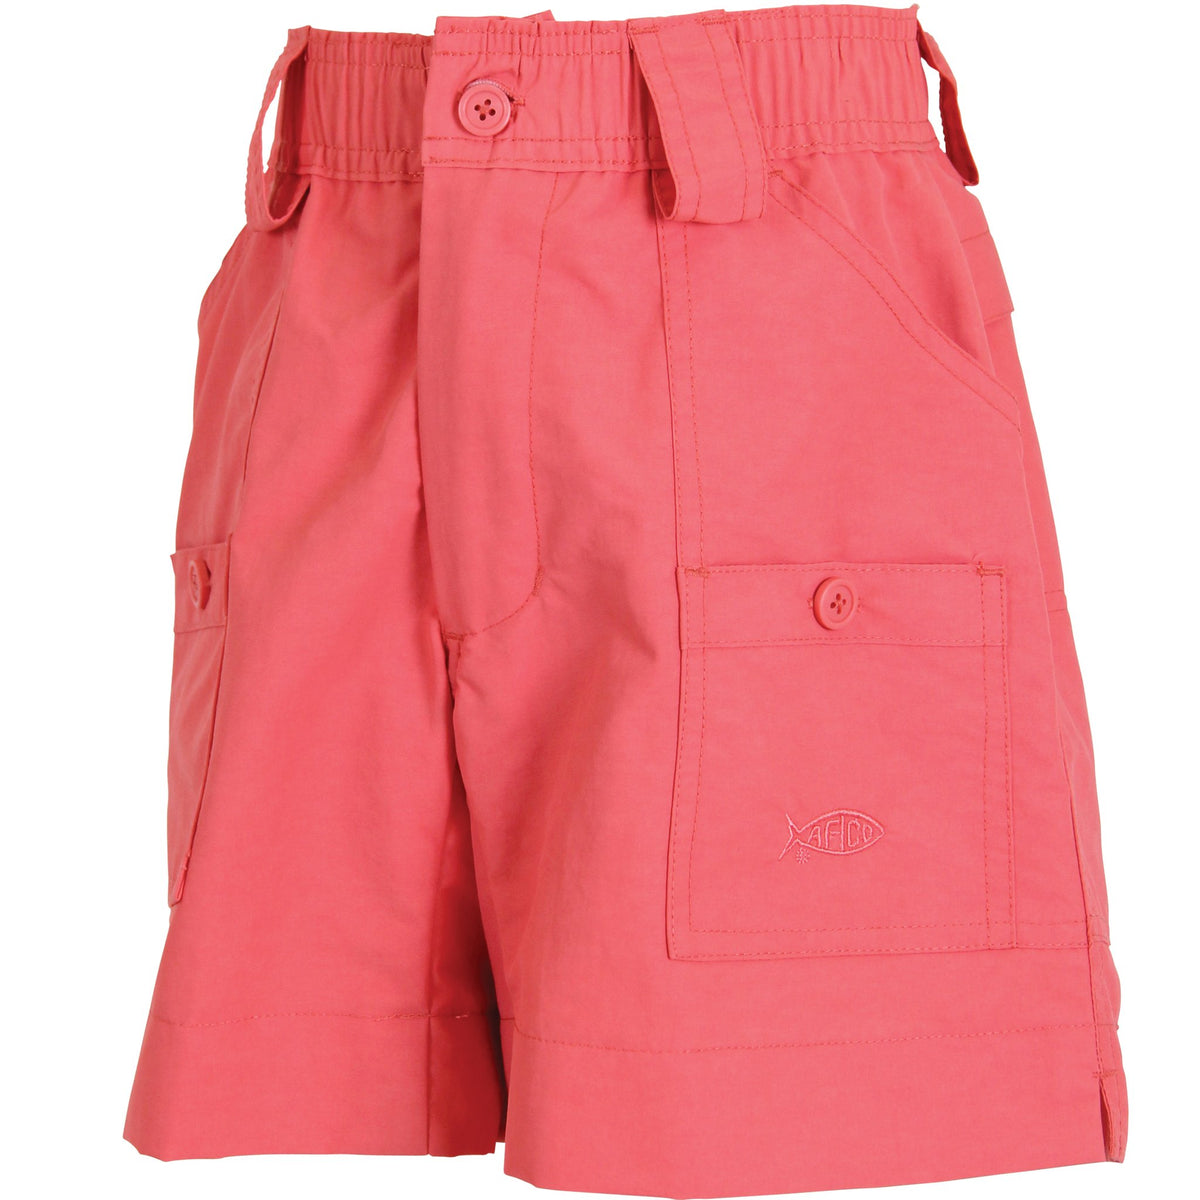 AFTCO Women's The Original Fishing Short - Hurrican Lilac - 2 at   Women's Clothing store